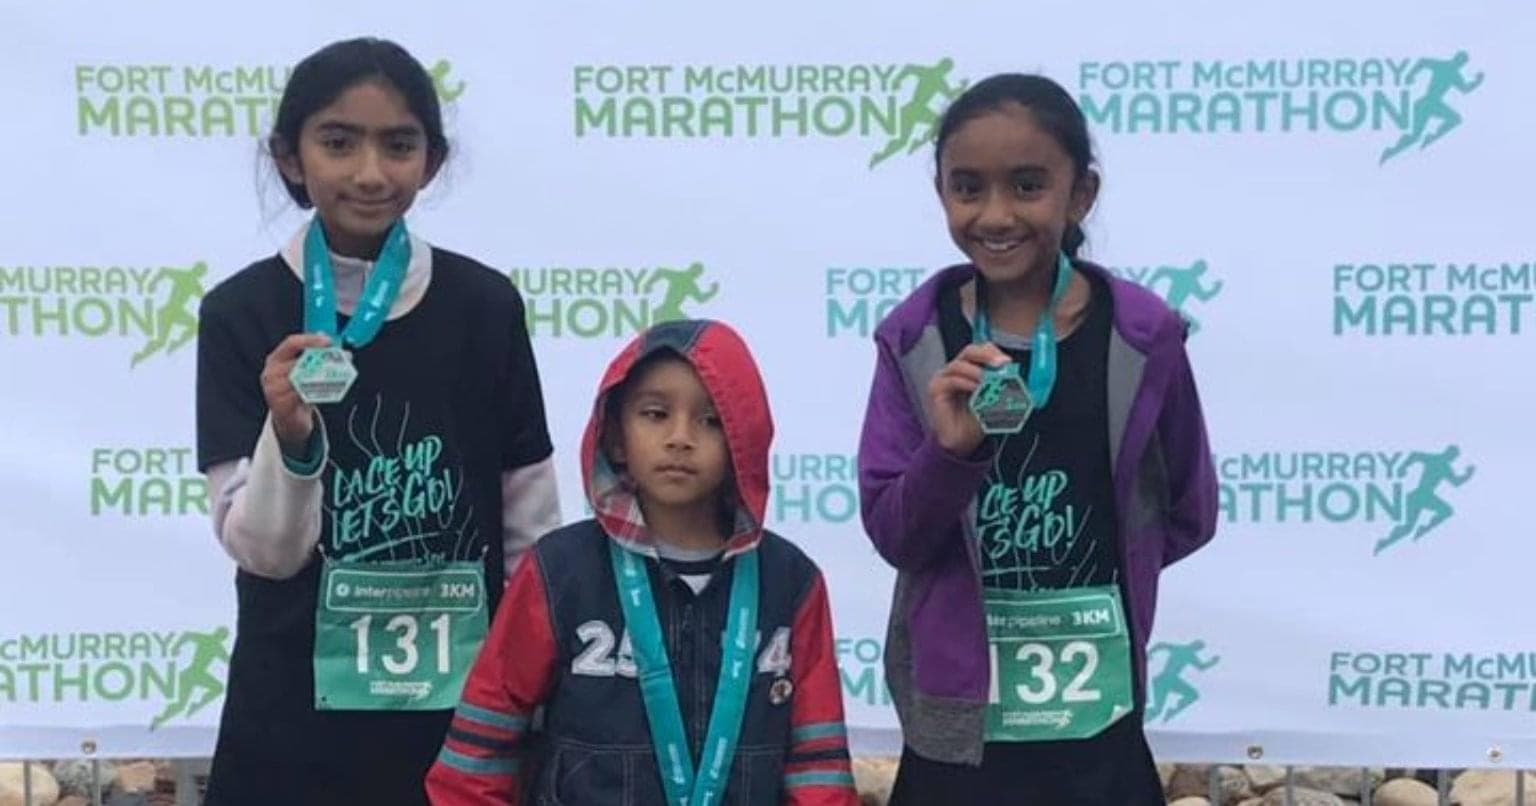 three children smiling with medals around their neck standing in front of sign that says Fort McMurray marathon